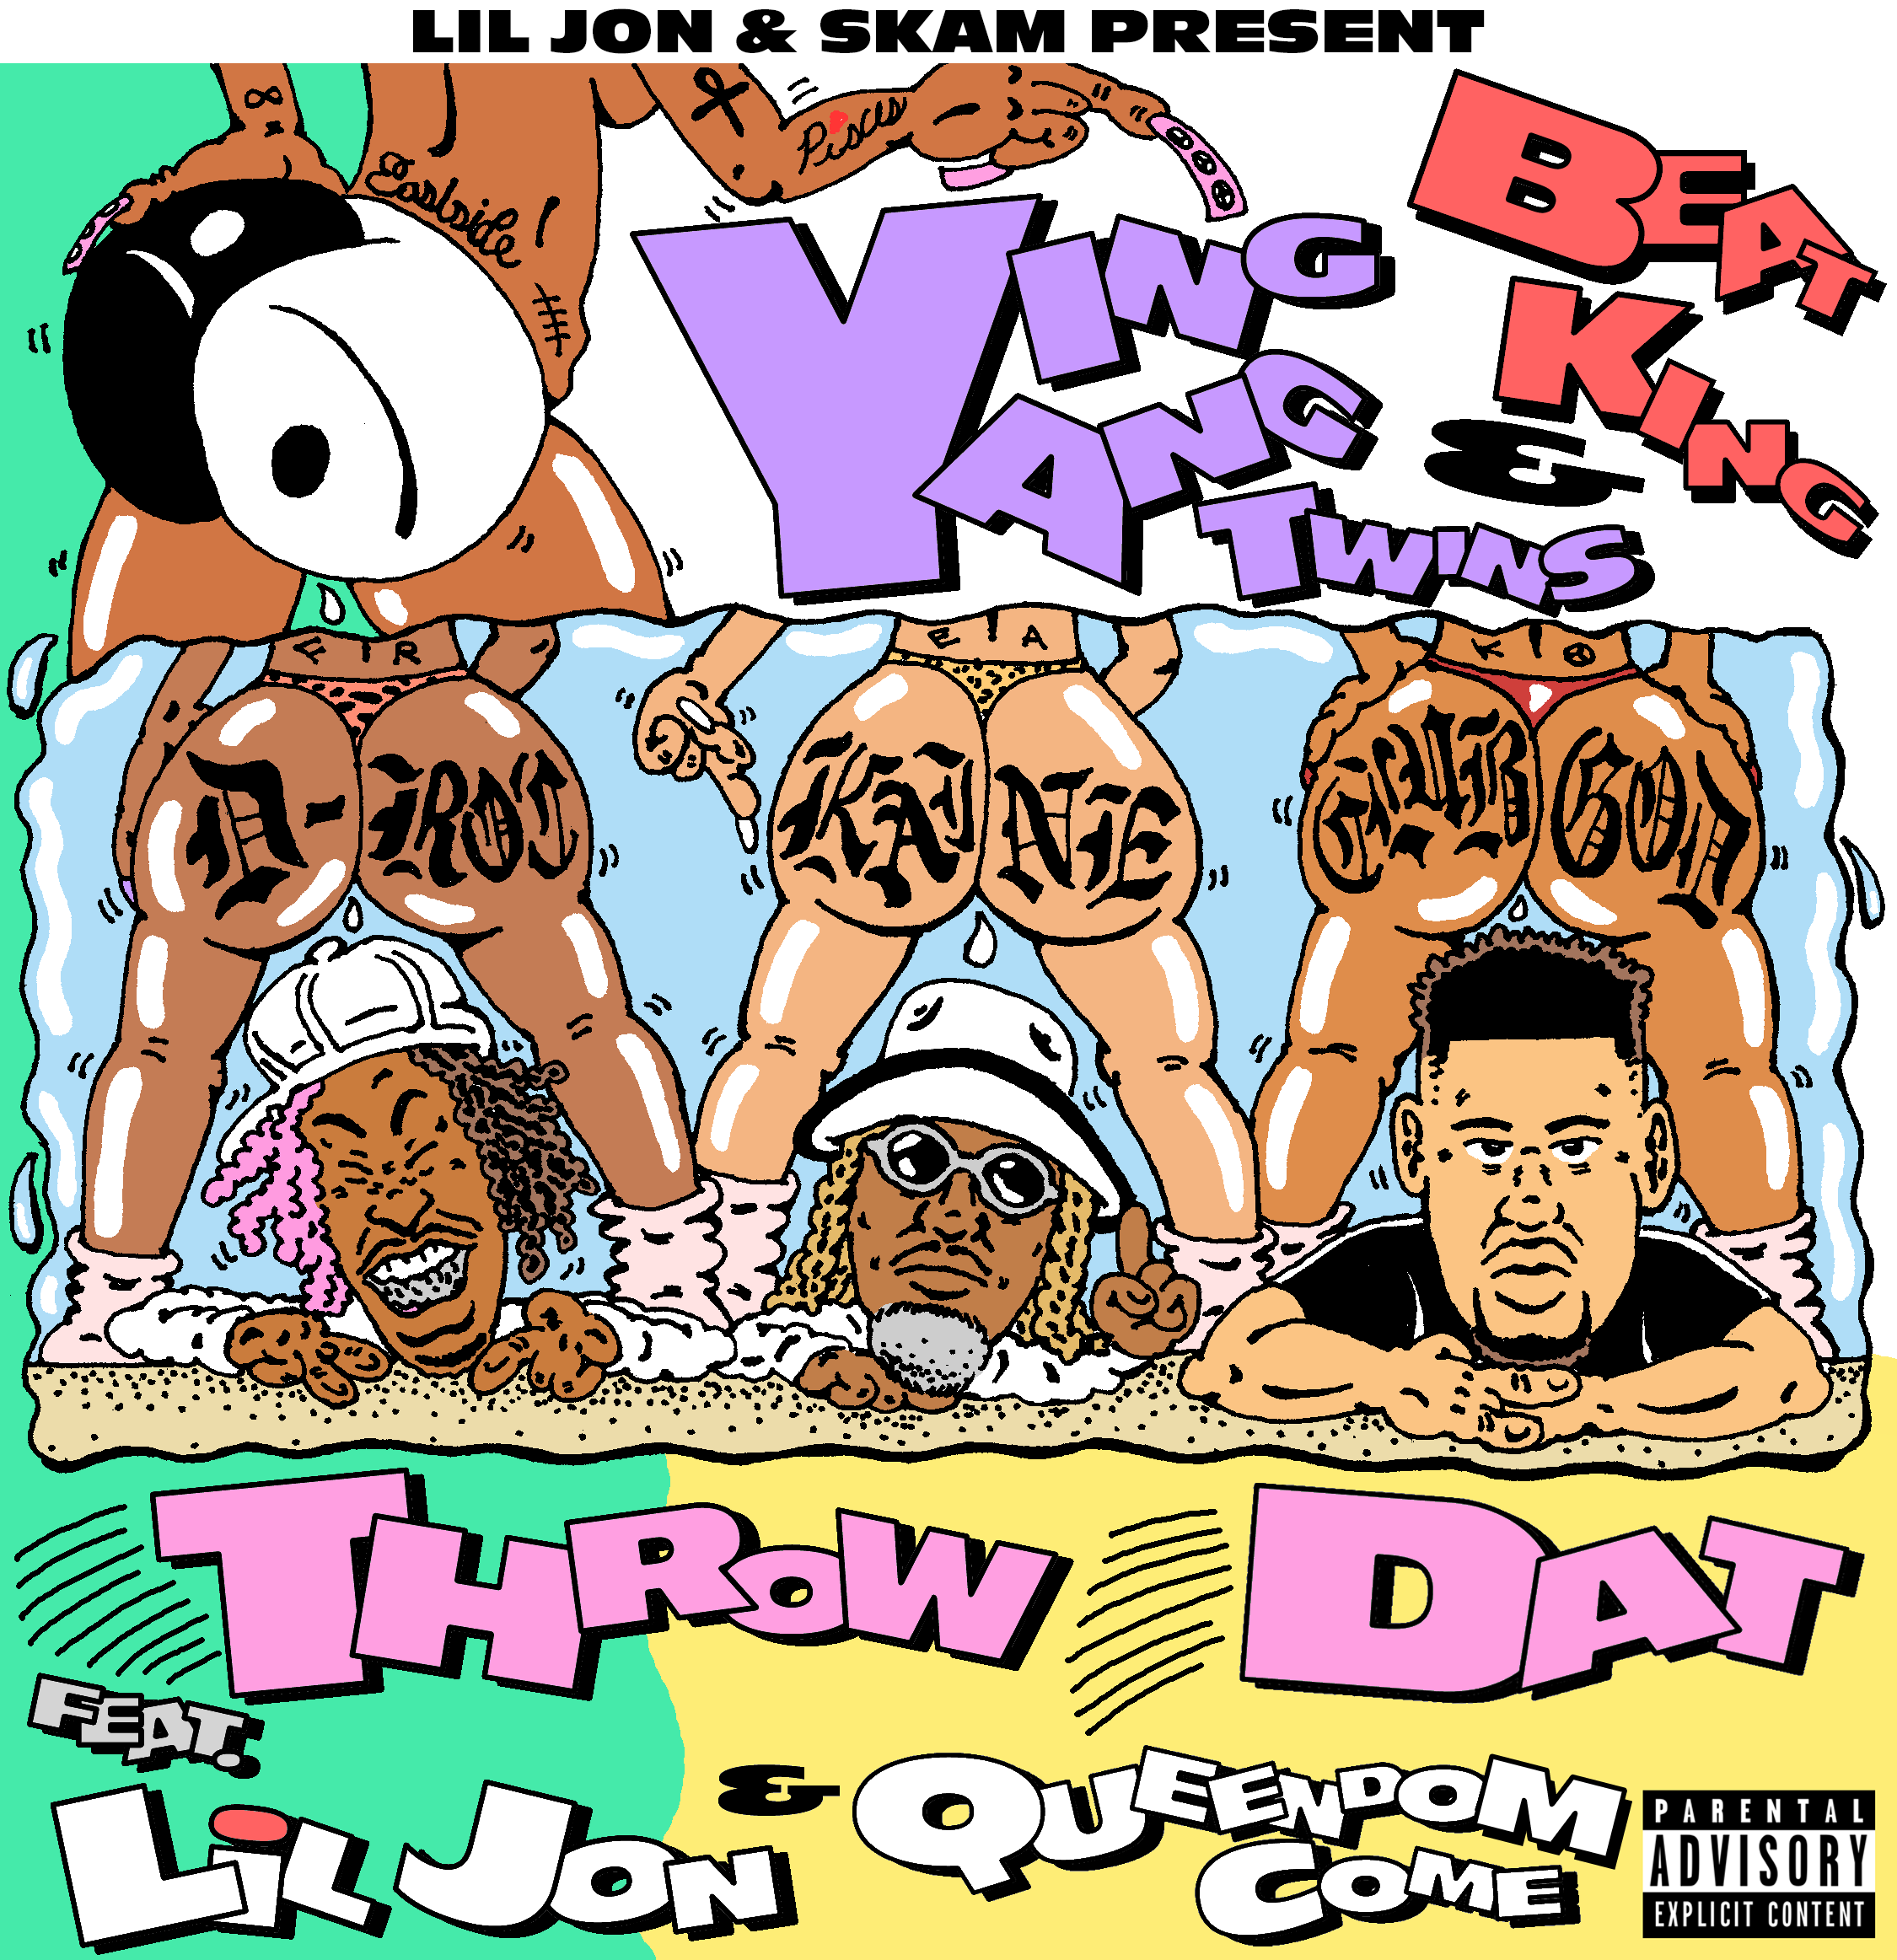 Art for Throw Dat (Intro Edit) (Clean) by Ying Yang Twins and BeatKing Ft. Lil jon and Queendom Com